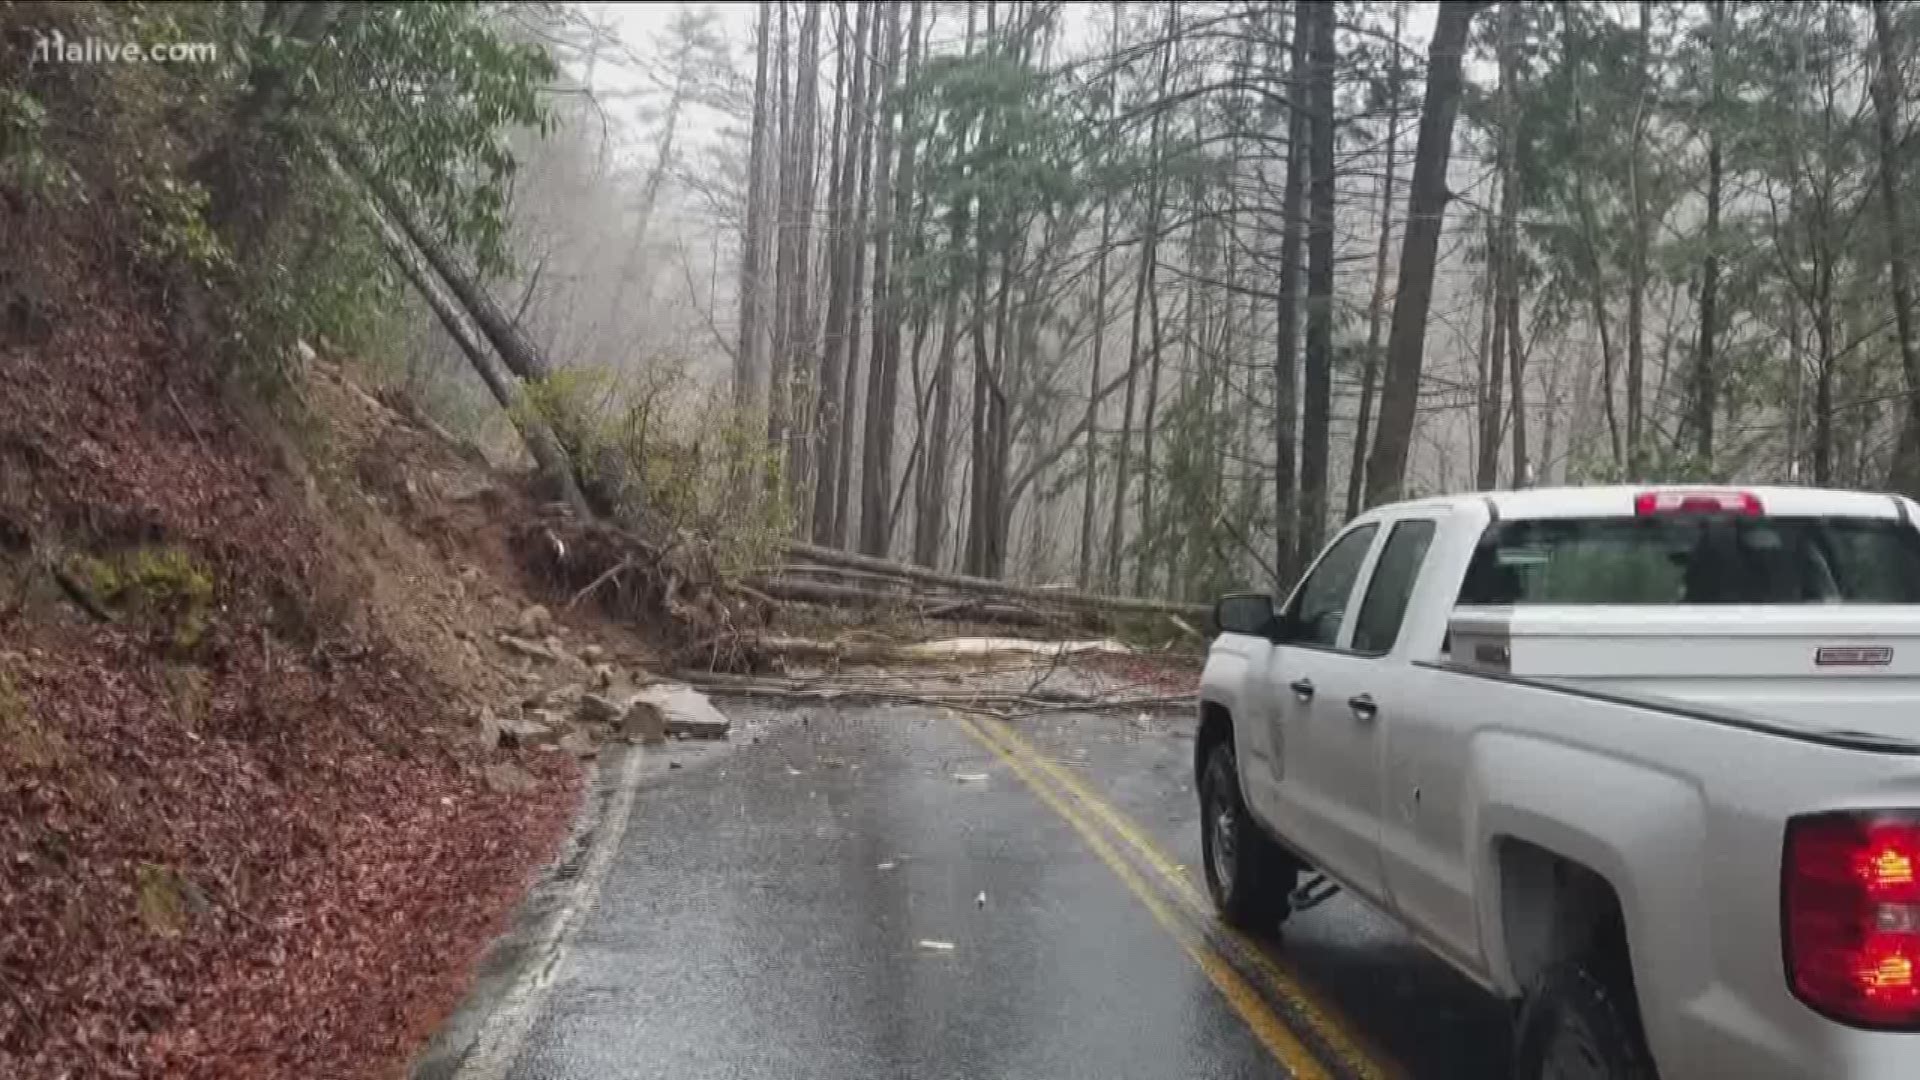 The landslide shut off a main road to the falls as heavy rains slam much of north Georgia.